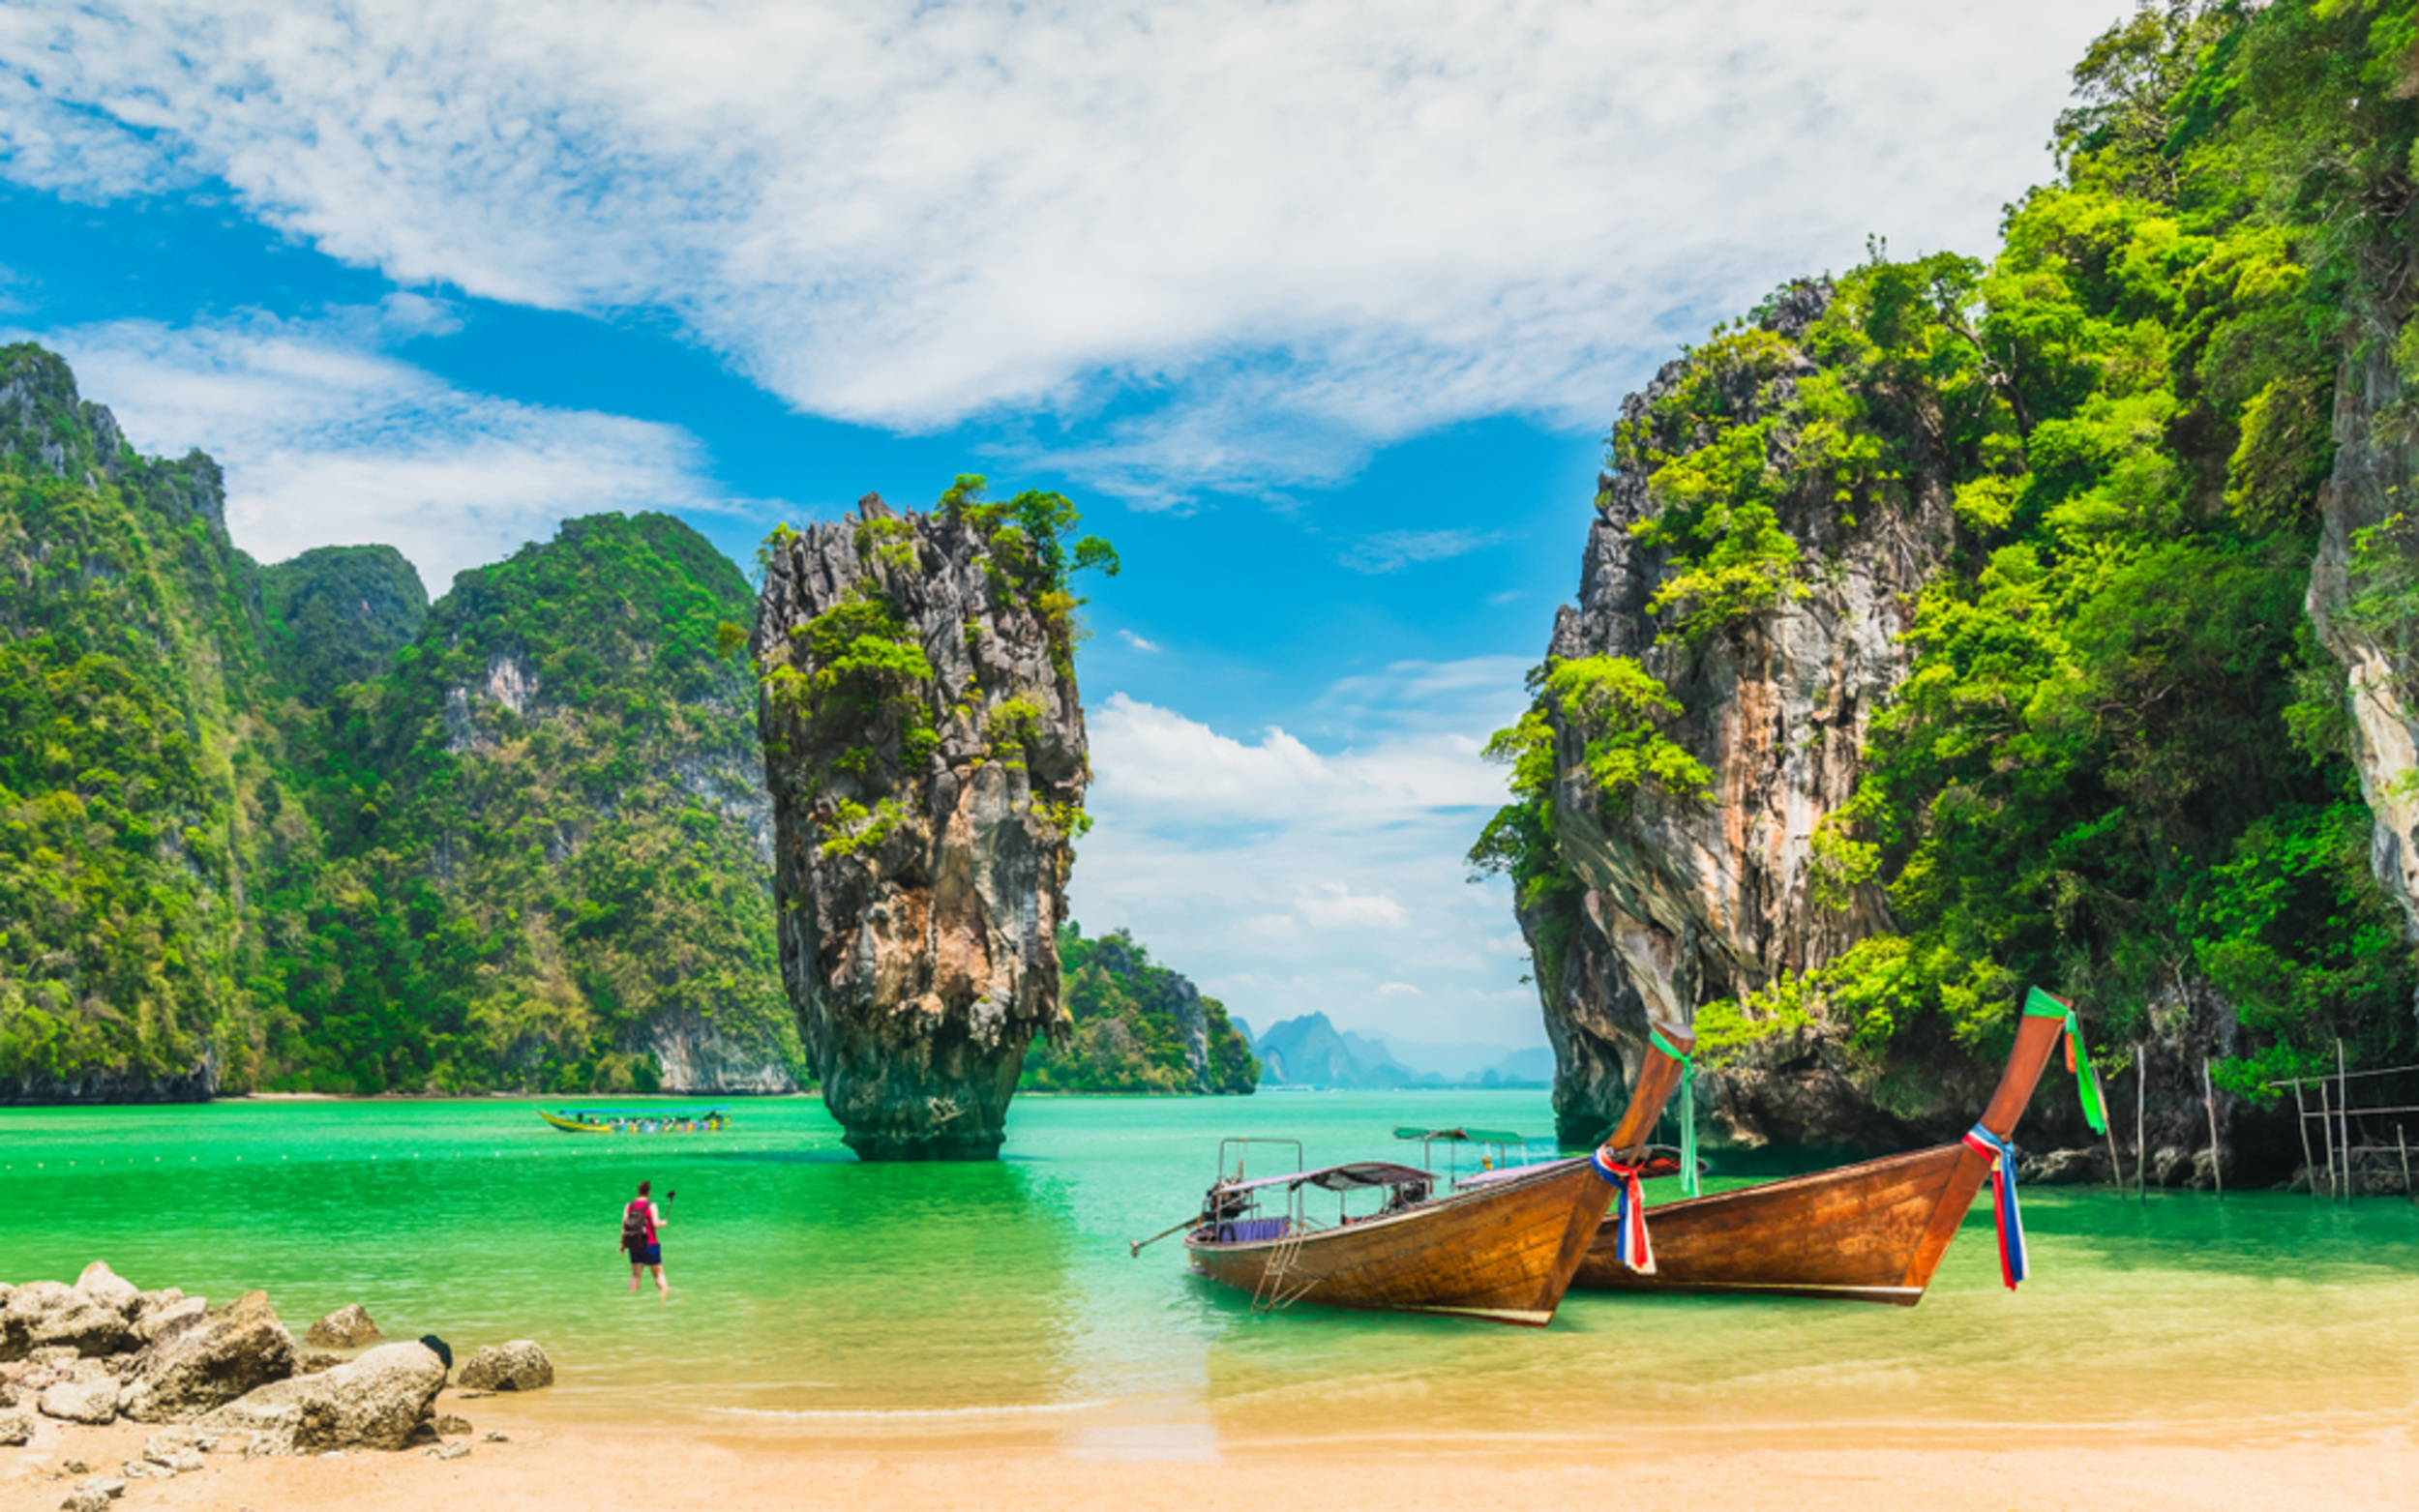 <p>The largest island in Thailand, Phuket, is also one of its most beautiful. The beaches here are covered in gorgeous white sand, the waters are calm, and the snorkeling is top-notch. There are also many interesting cultural sites, including a bounty of gorgeous and ornate temples. </p><p><a href='https://www.msn.com/en-us/community/channel/vid-cj9pqbr0vn9in2b6ddcd8sfgpfq6x6utp44fssrv6mc2gtybw0us'>Follow us on MSN to see more of our exclusive lifestyle content.</a></p>